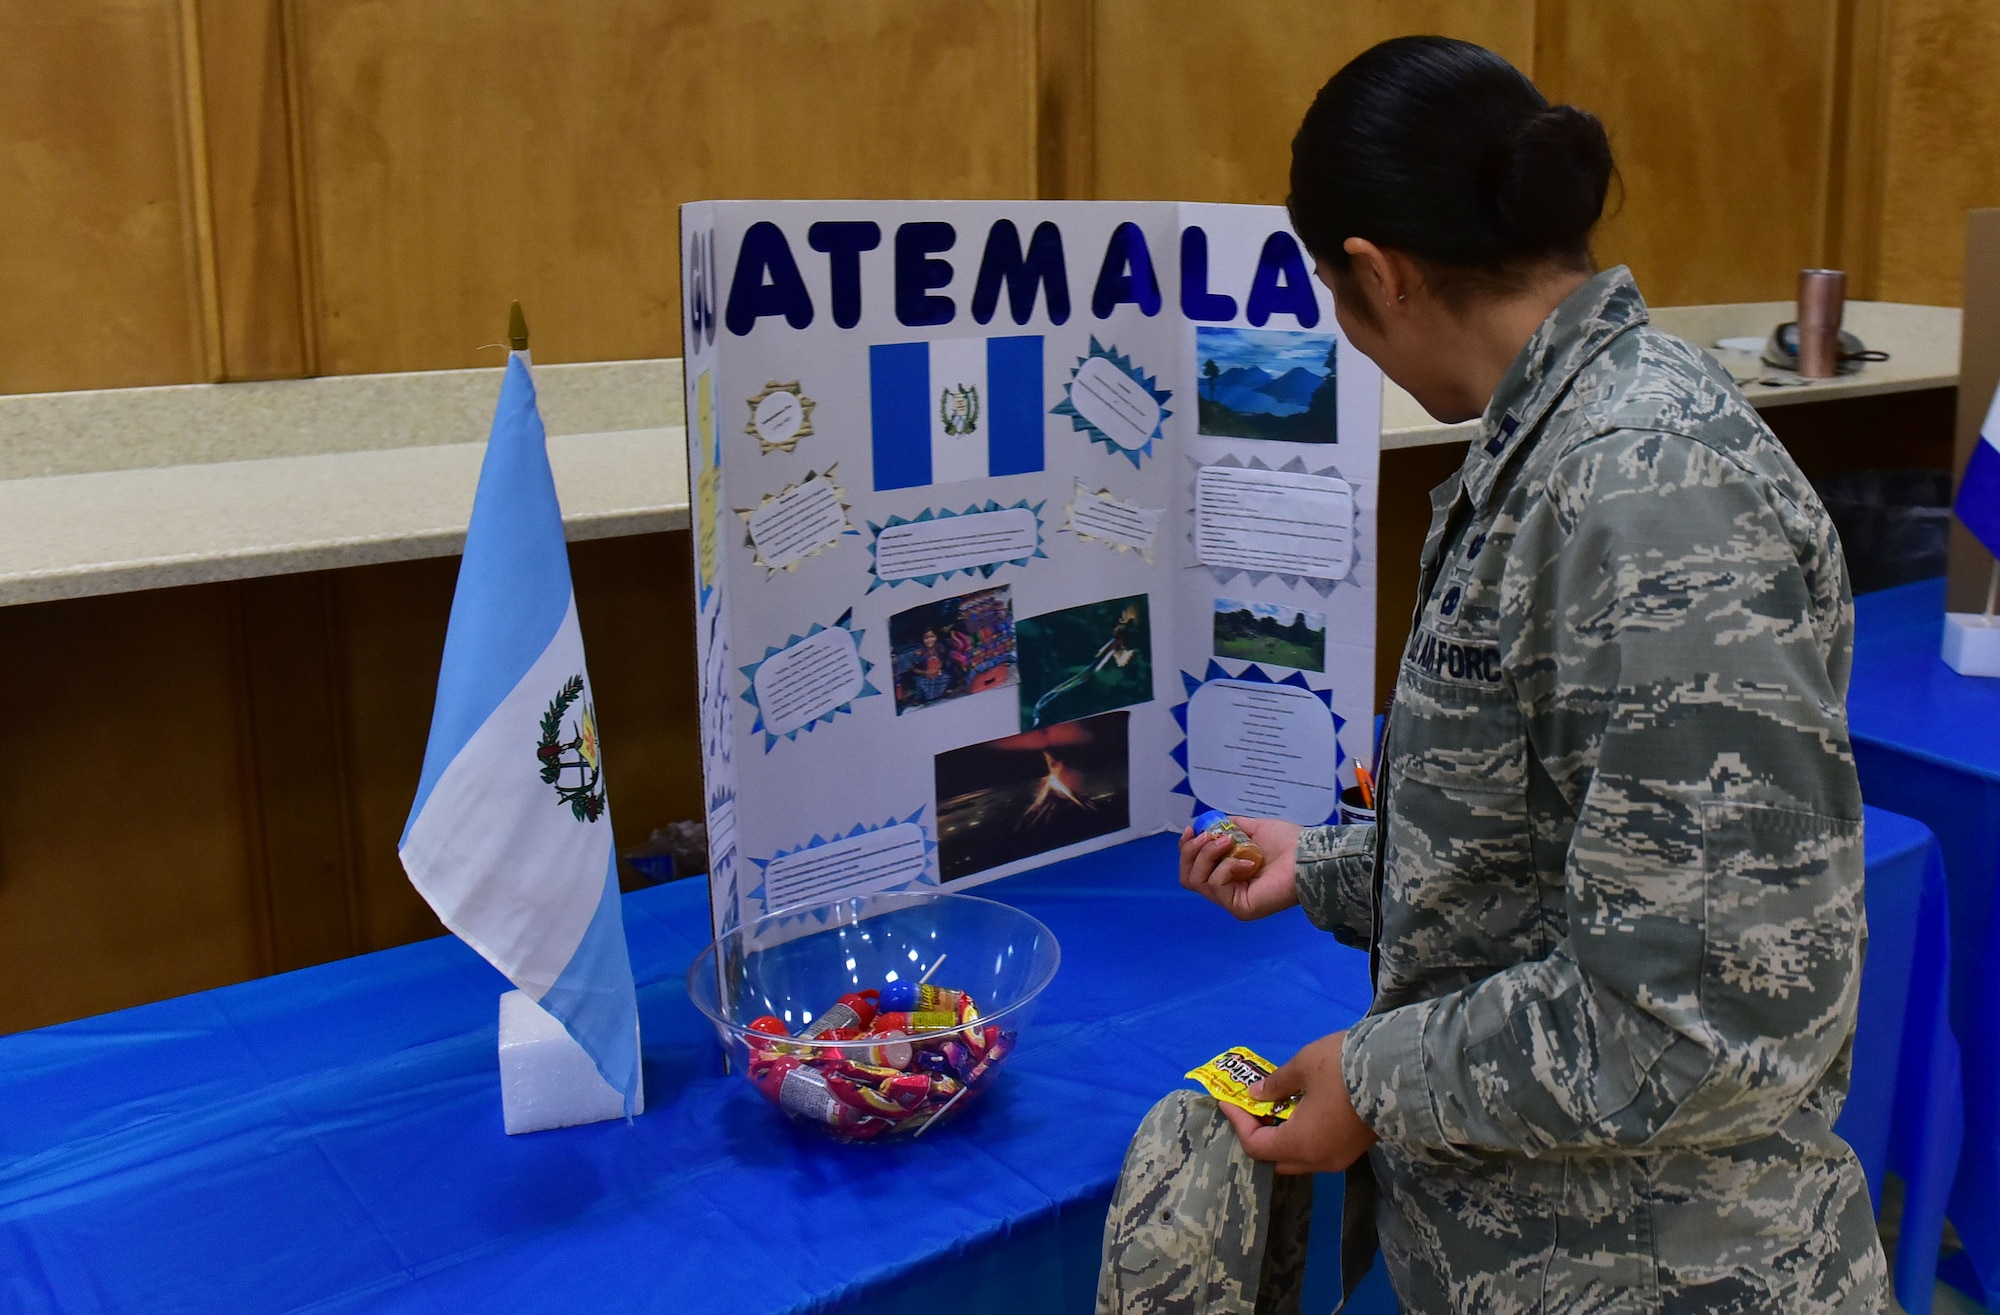 Capt. Christina Salinas, 314th Maintenance Squadron officer in charge of maintenance operations, reads about the history of Guatemala at the Hispanic Heritage Info Fair Sept. 29, 2017, at Walter’s Community Support Center on Little Rock Air Force Base, Ark. There were booths featuring 20 different Hispanic countries. (U.S. Air Force photo by Airman Rhett Isbell)